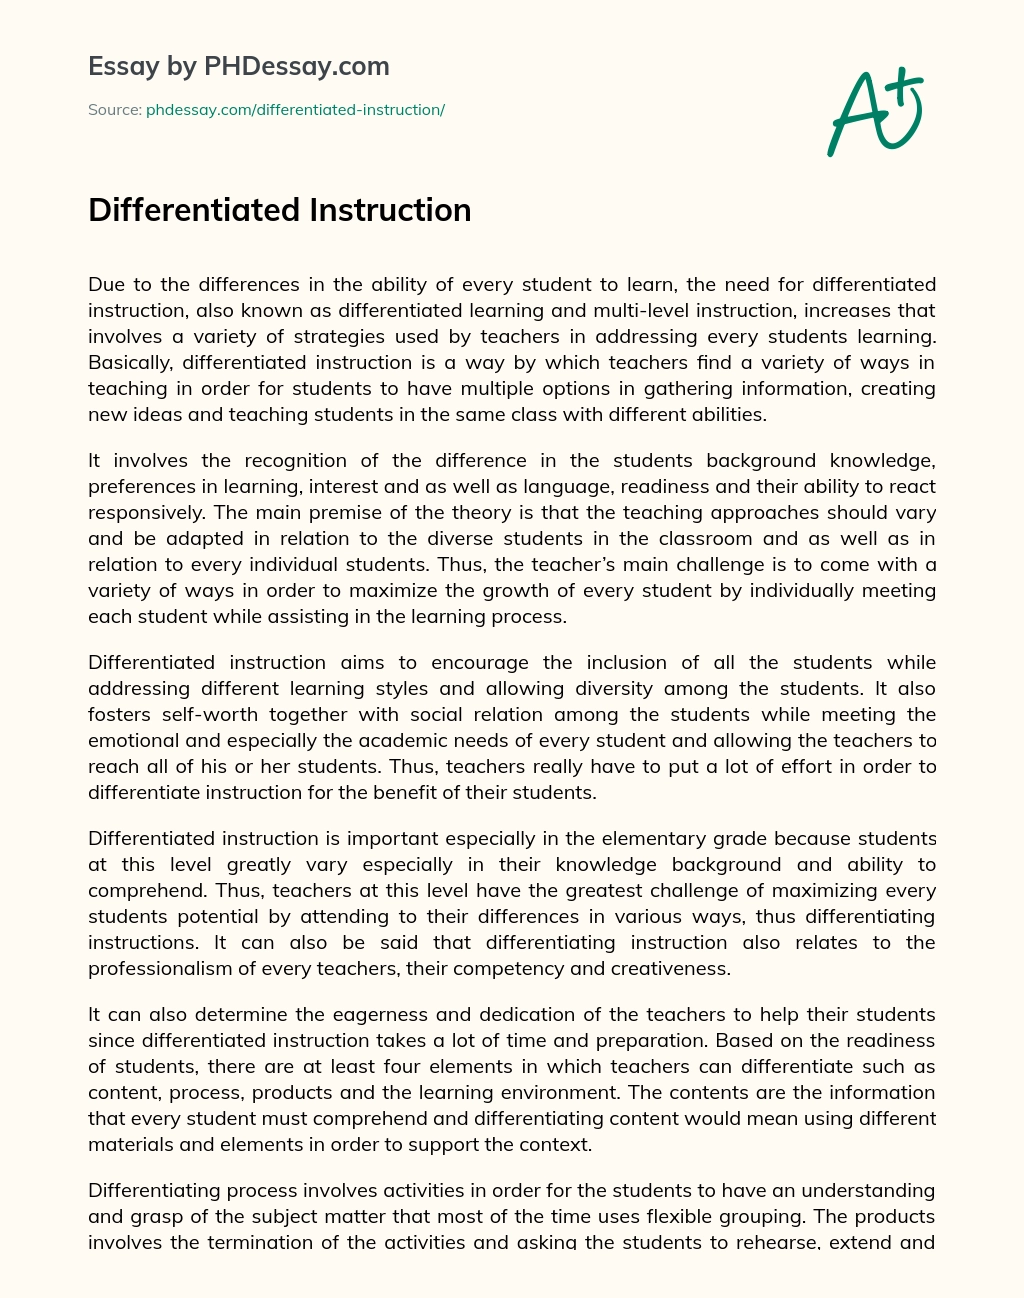 Differentiated Instruction essay